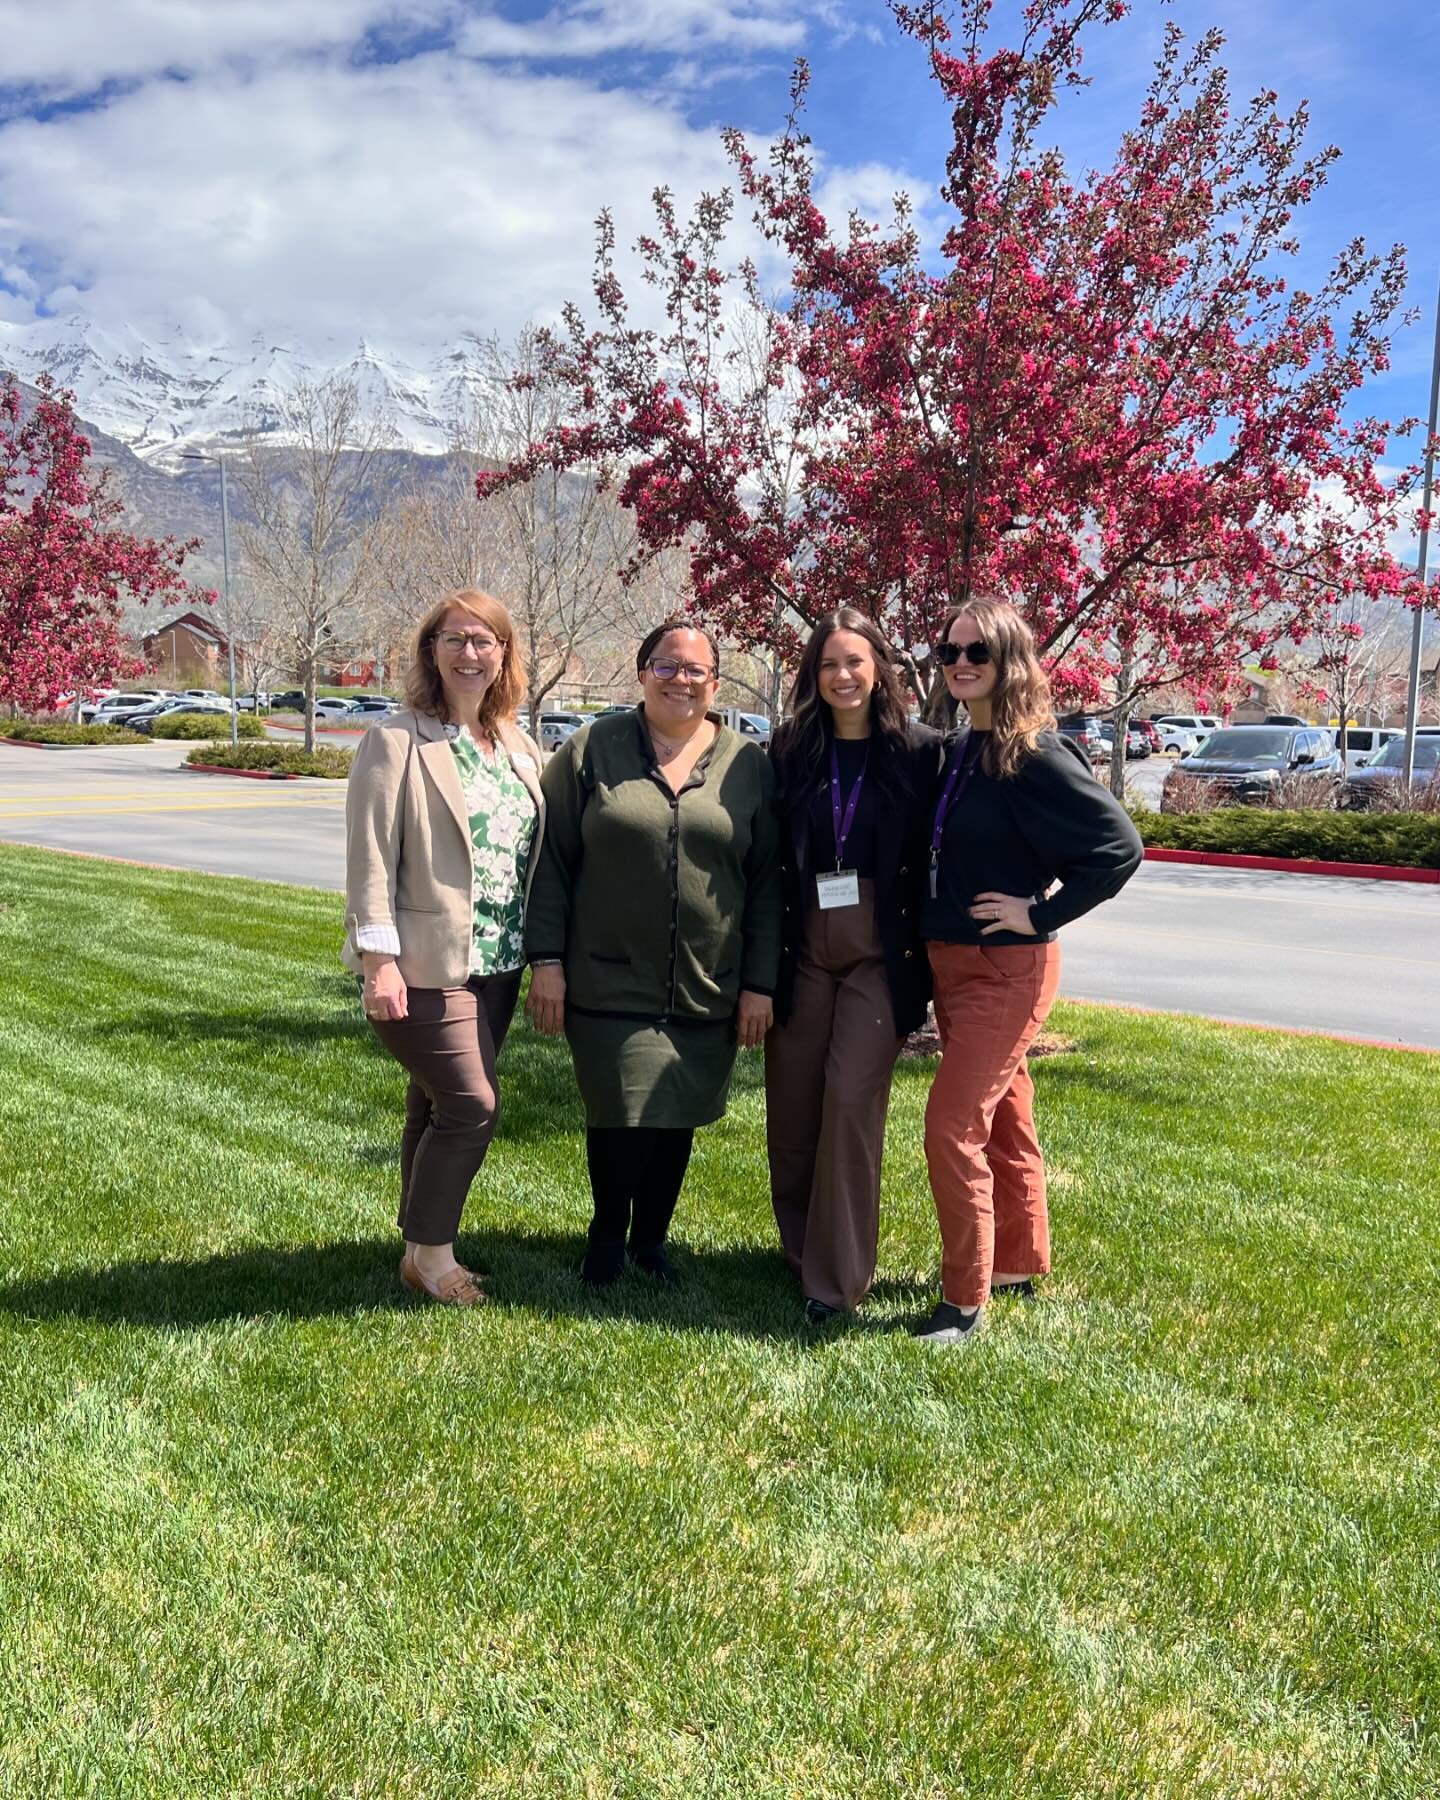 It was a fantastic week of learning, growing, connecting and dreaming at @shelteredalliance national conference in Utah. Our team leaned in to sessions that expanded our capacity and knowledge, and we&rsquo;re excited to put new ideas to work, to ben